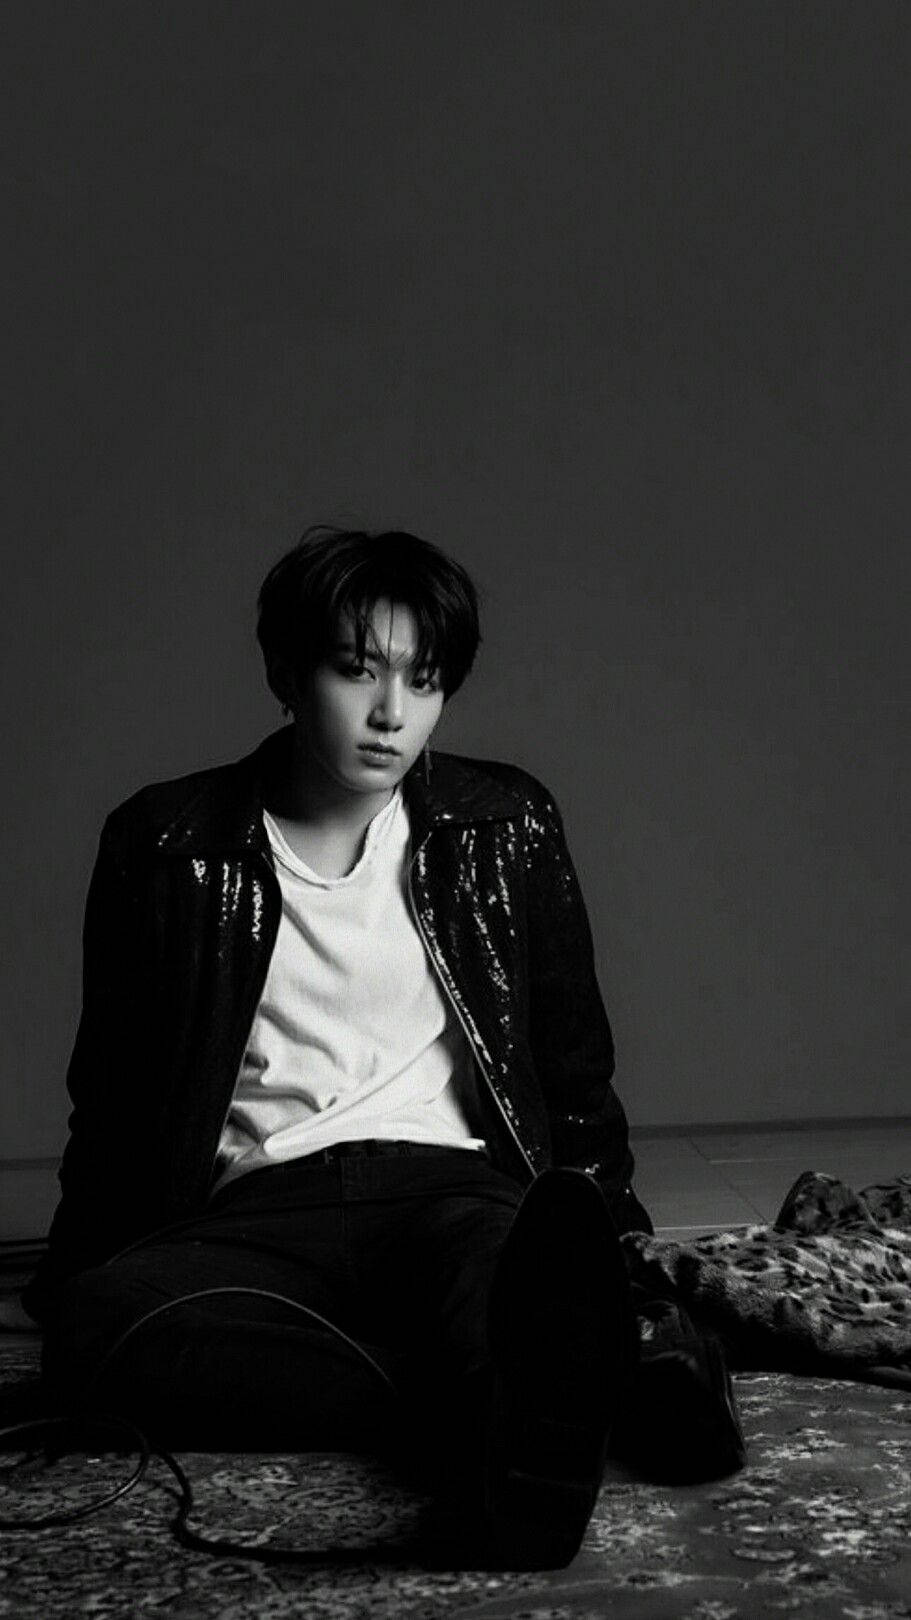 Bts Jungkook Black And White Background